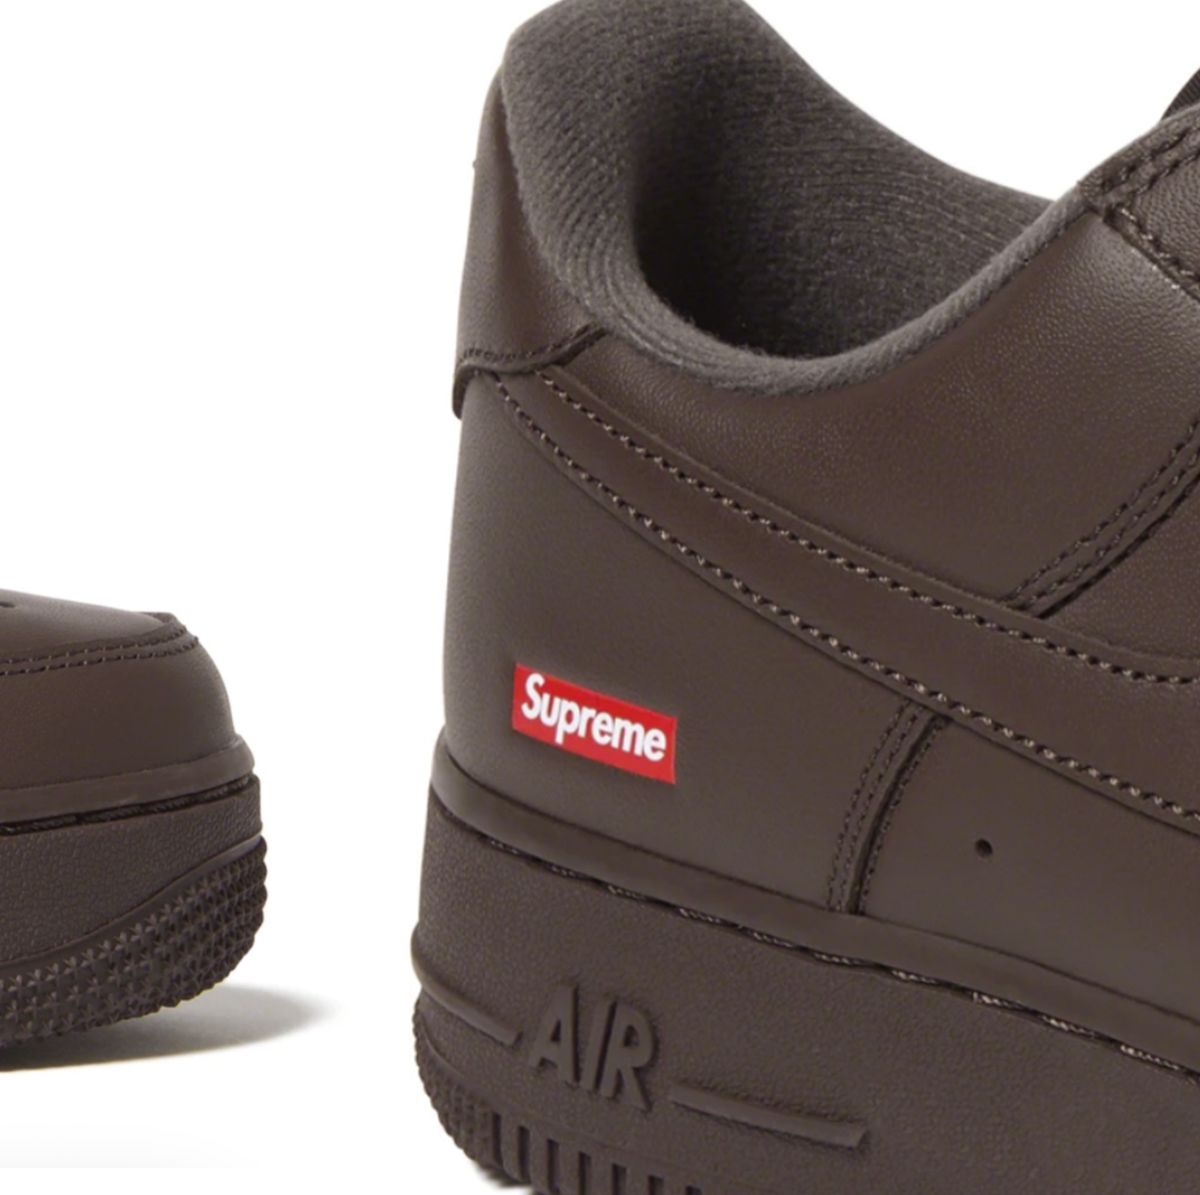 Footwear, Supreme Shoes In Cheapest Price